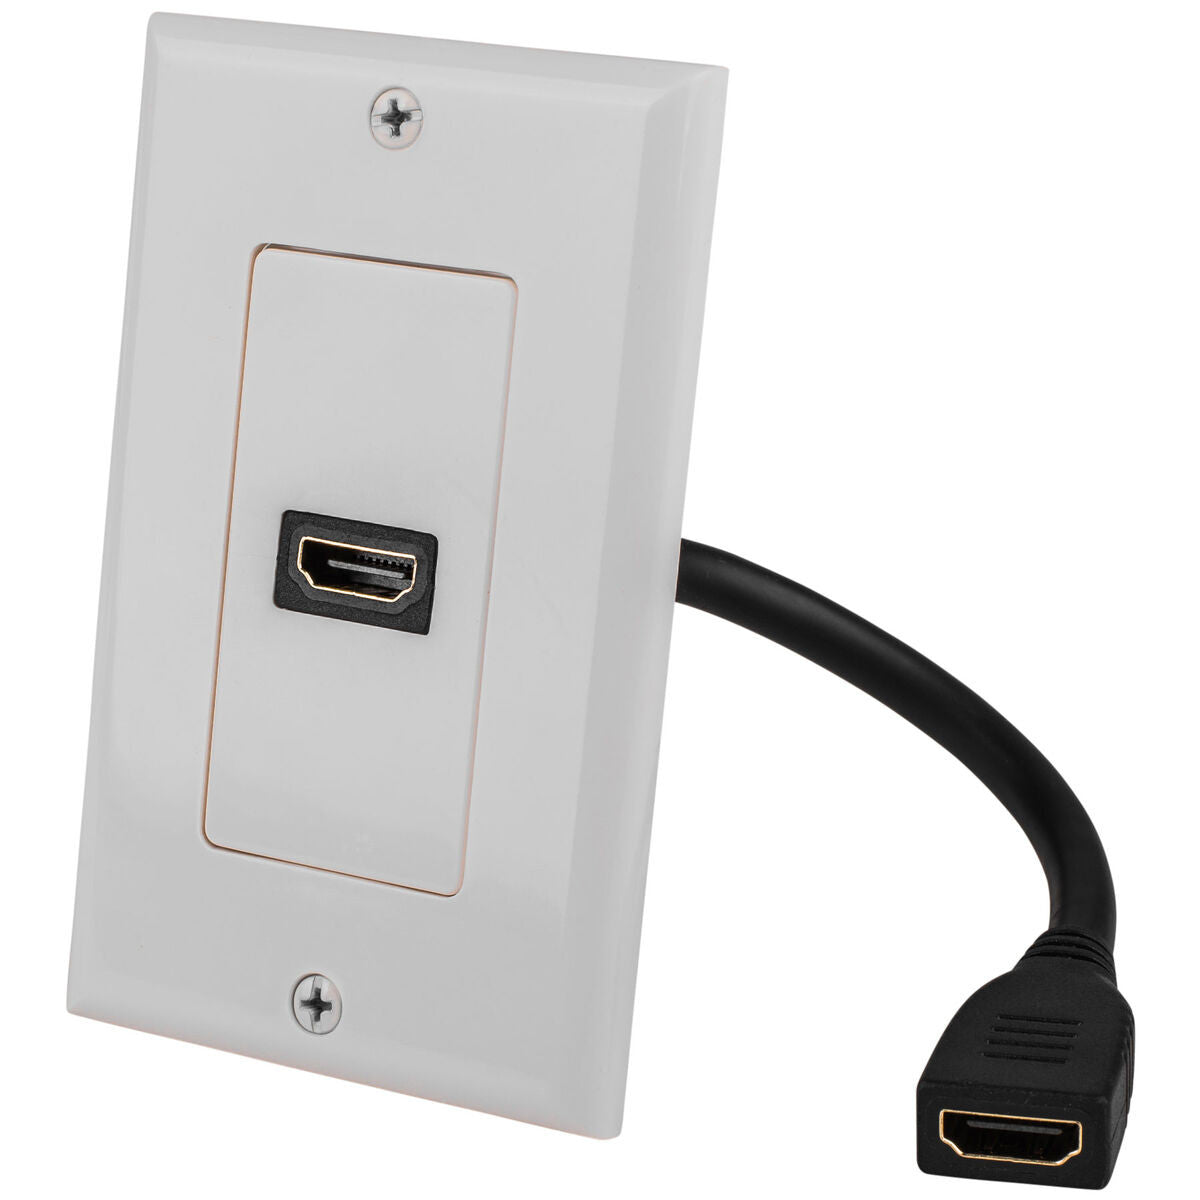 DataComm 20-4503-WH Standard Wall Plate with HDMI Connector and Pigtail White